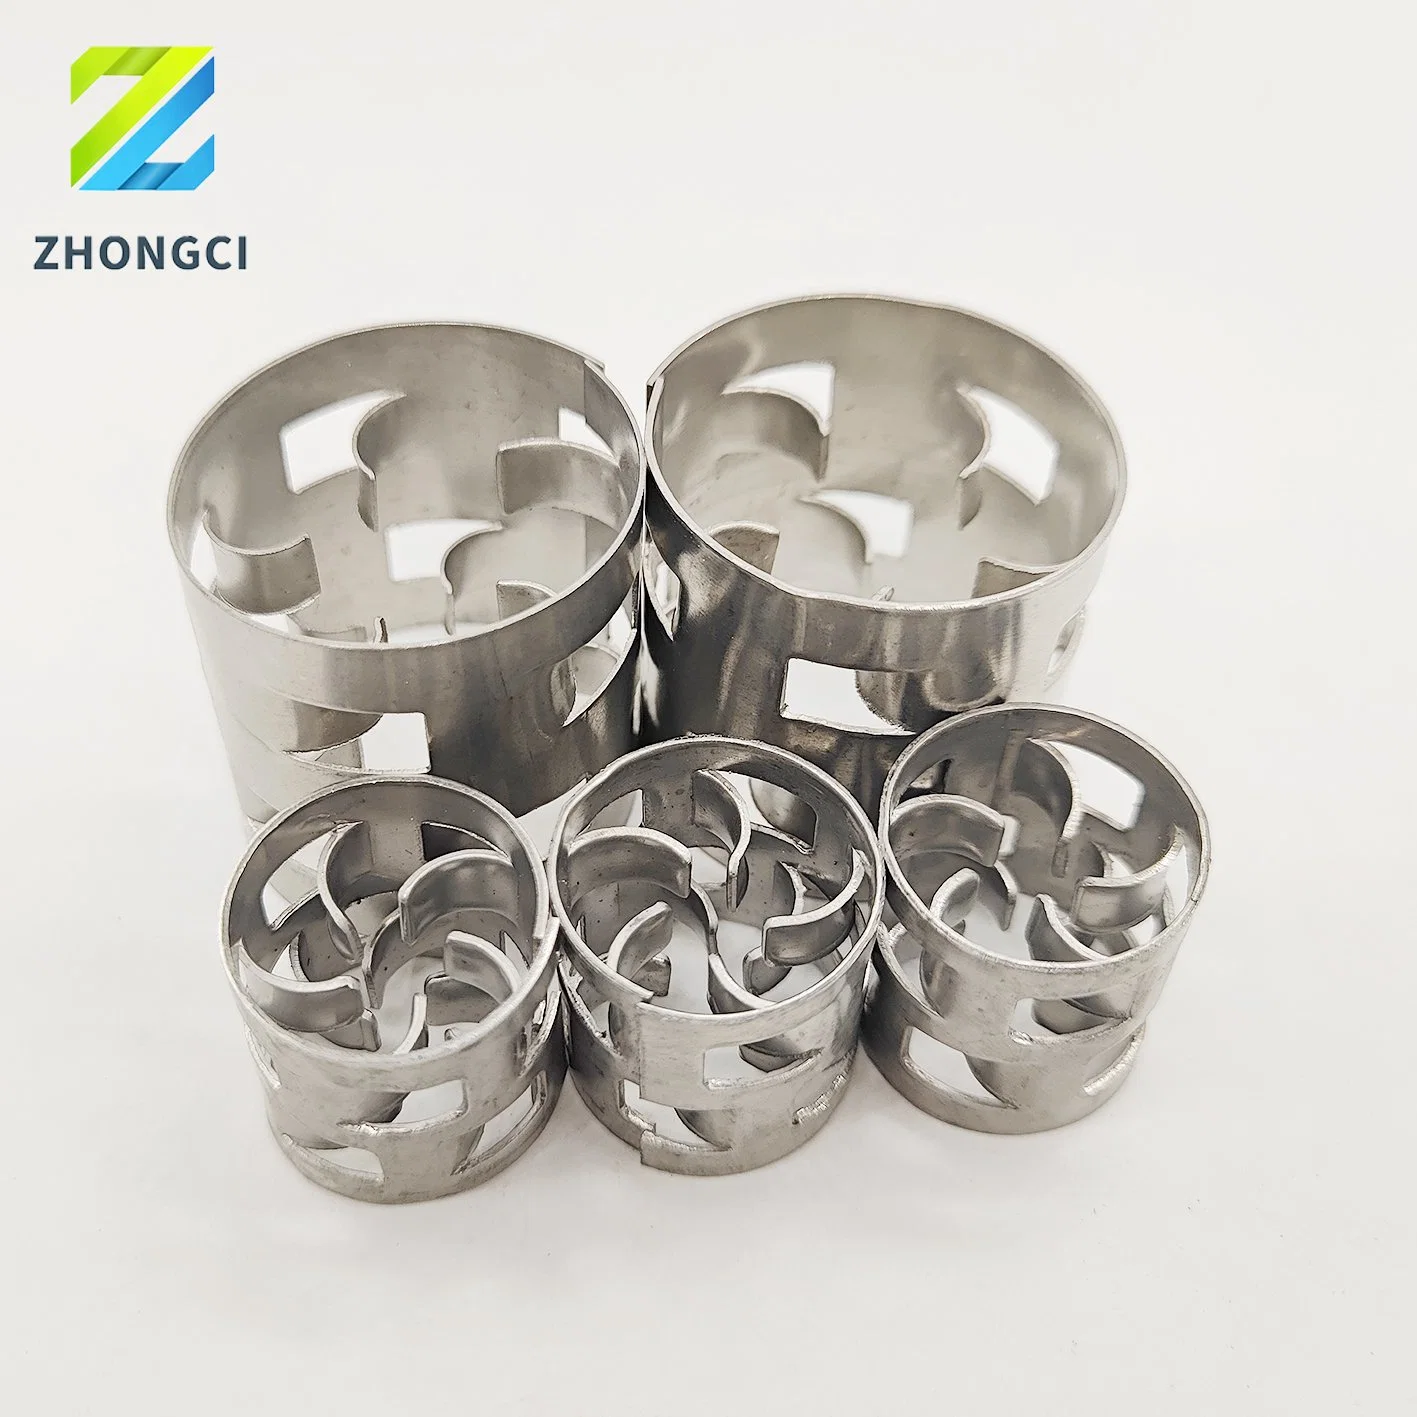 Zhongci Metal Random Packing Pall Ring for Chemical Tower